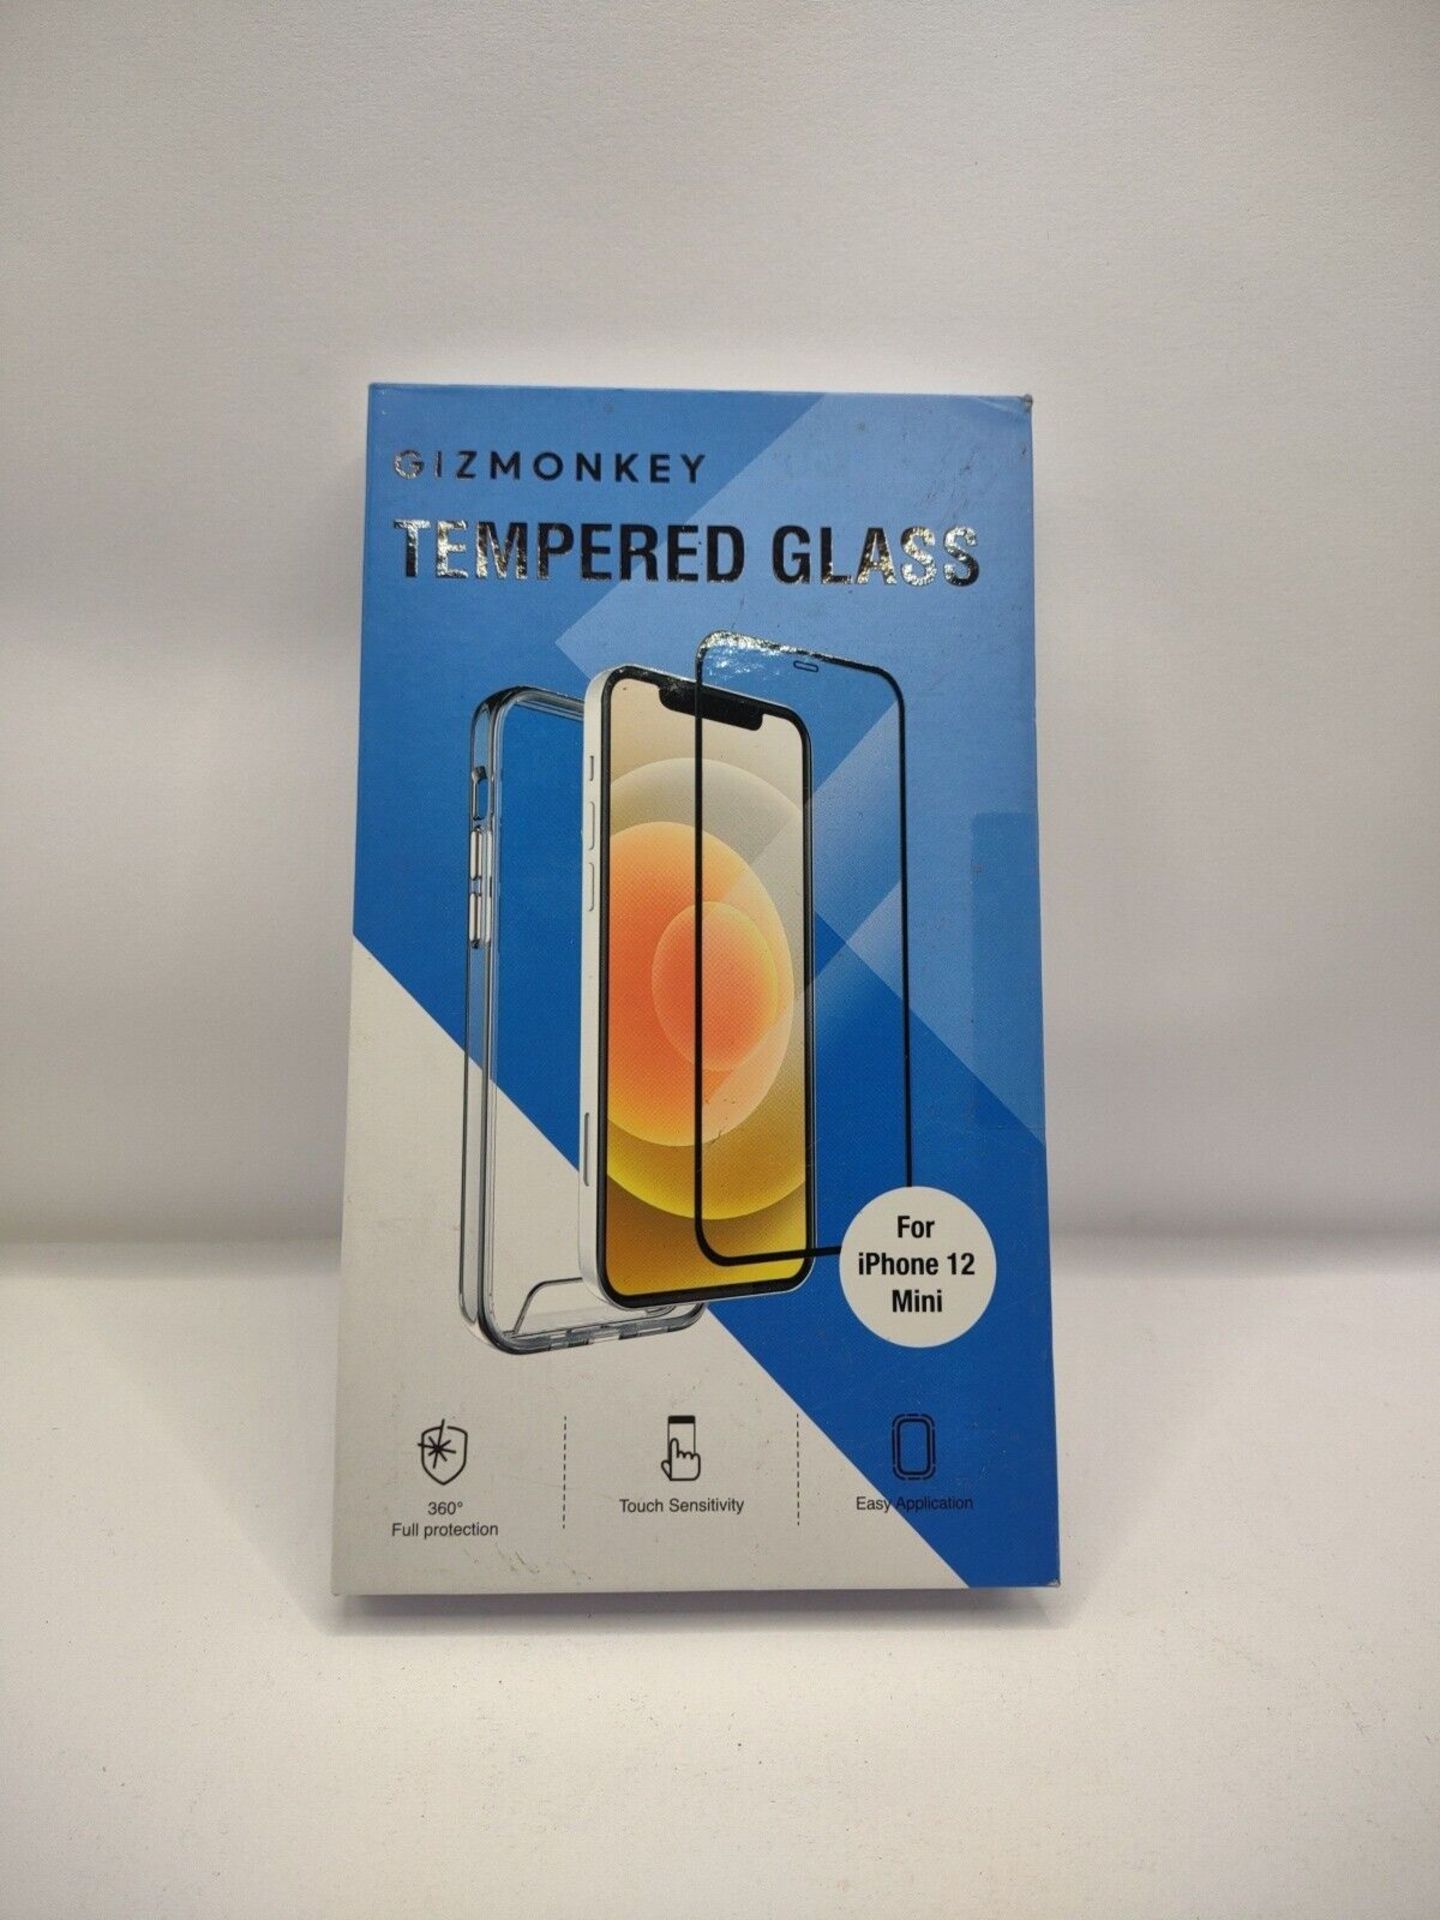 10 x Gizmonkey Case and Tempered Glass 360 Full Protection For iPhone 12 Mini. RRP £70 - Grade A